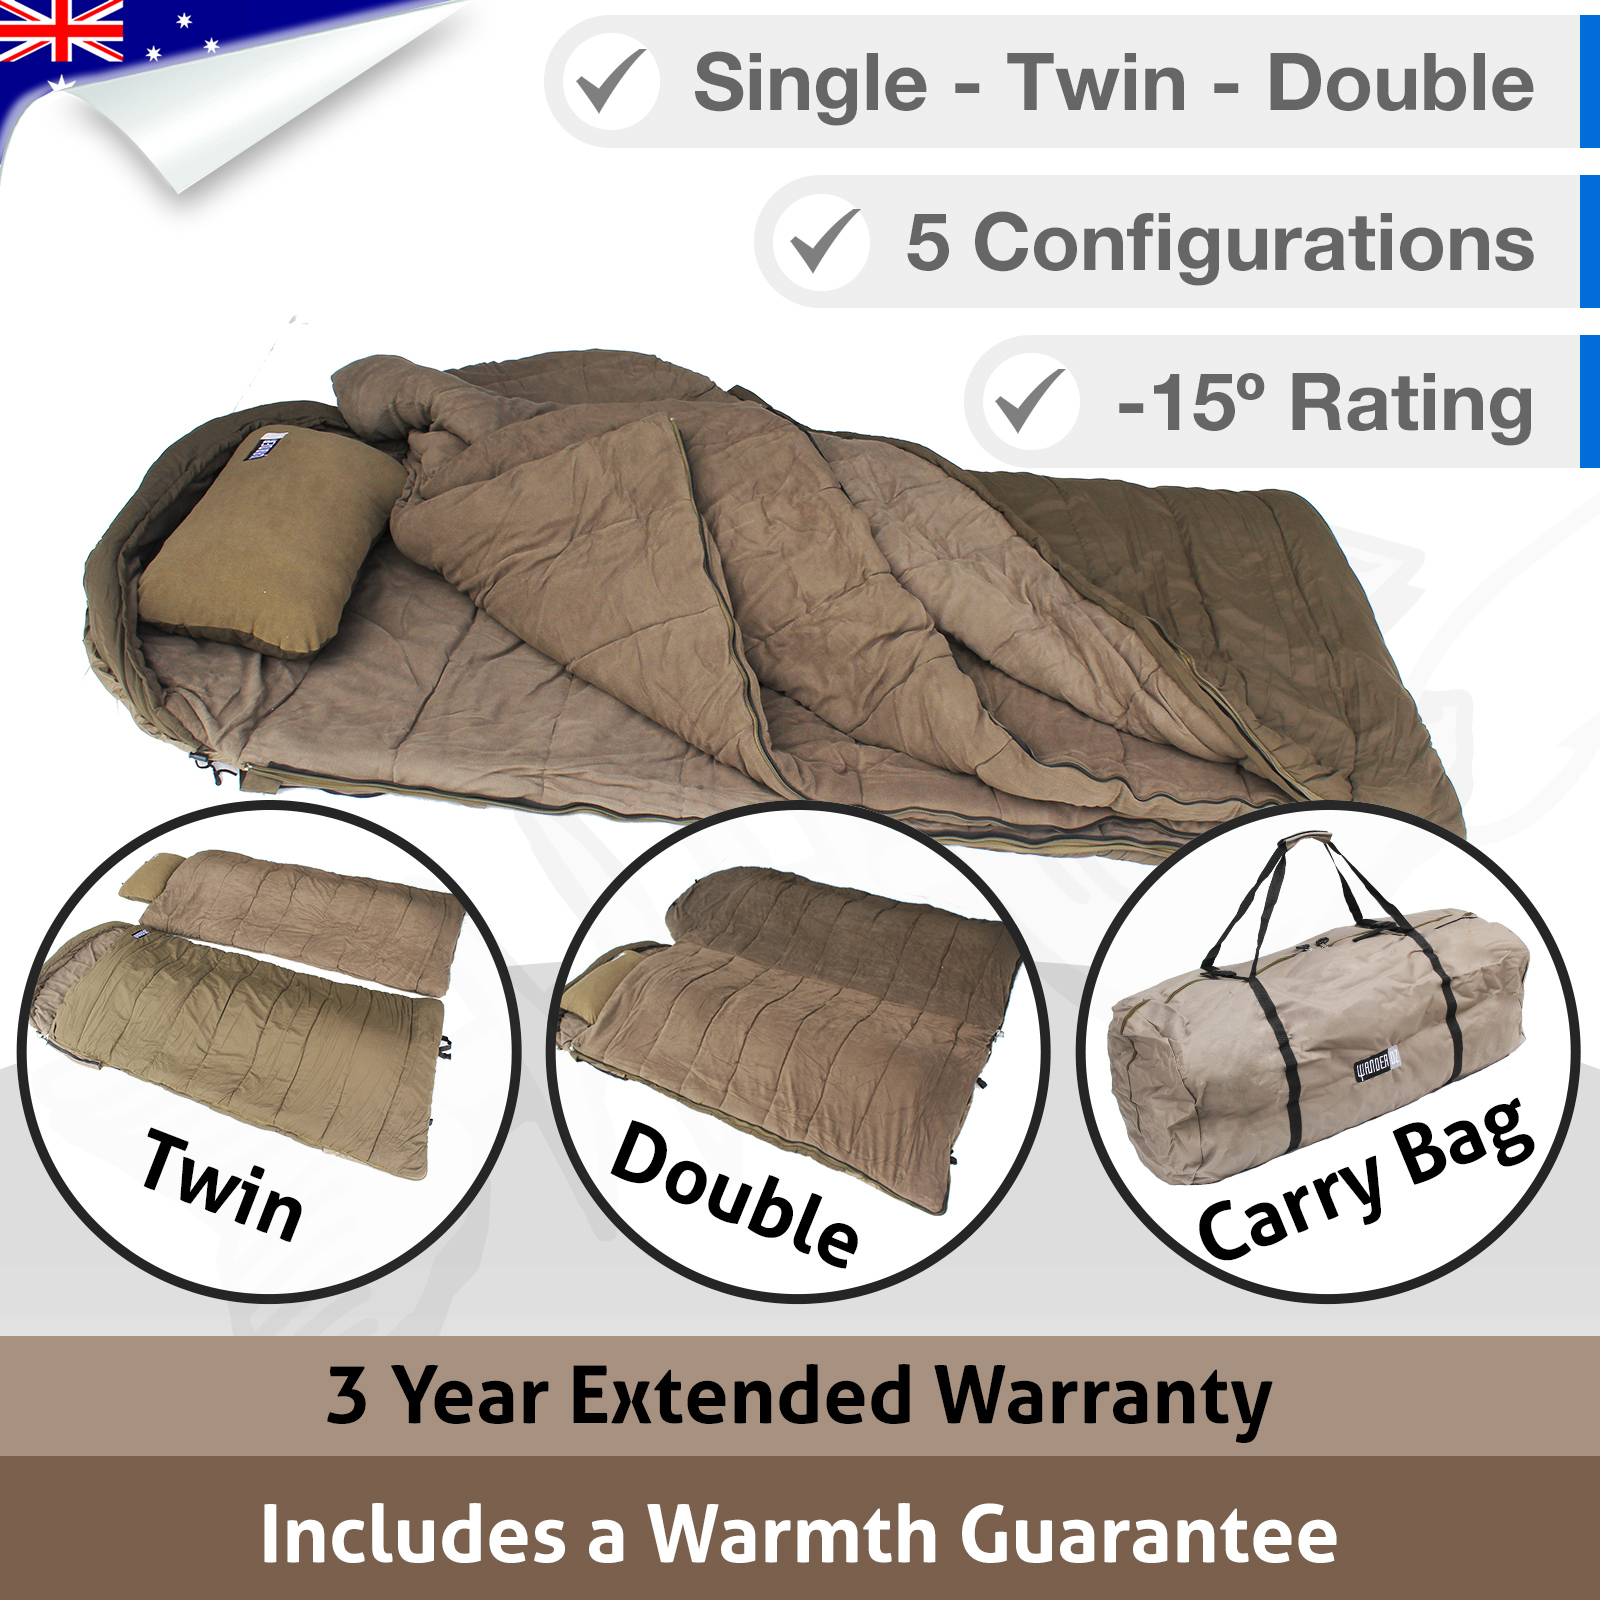 Deluxe DOUBLE Outdoor Camping Sleeping Bag Hiking Thermal Winter Twin -15  °C XL